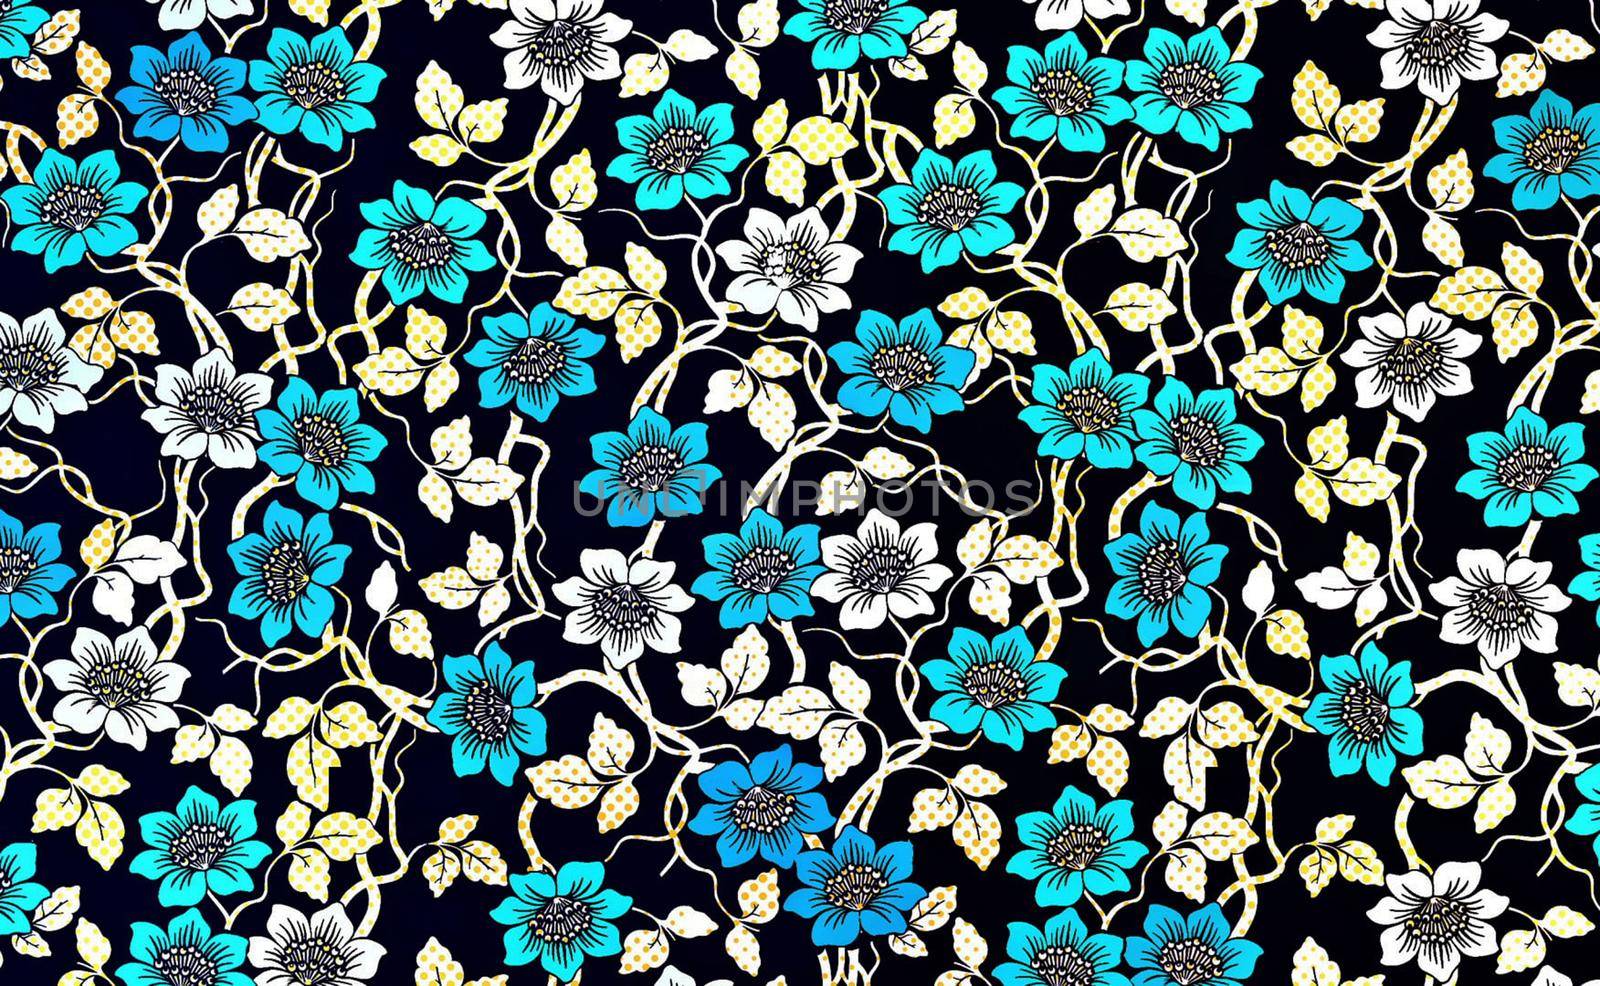 Flowers backgrounds perfect for wrappers, wallpapers, postcards, greeting cards, wedding invitations, romantic events.